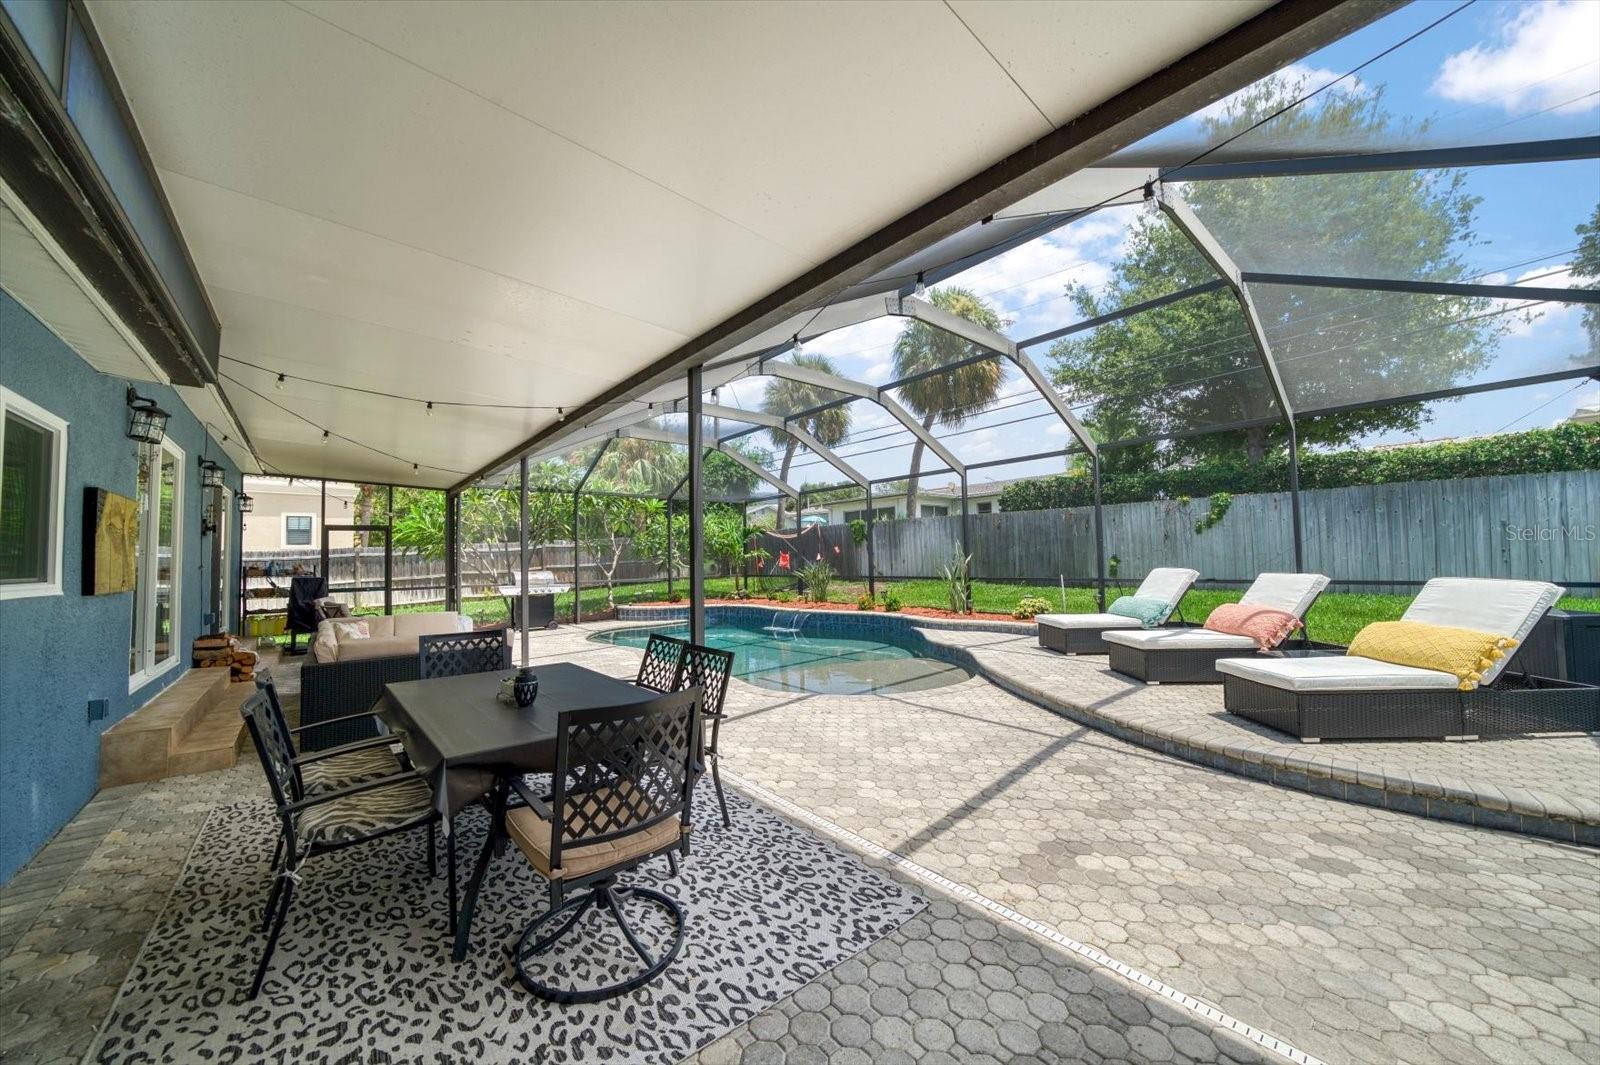 Covered Outdoor Dining / Pool with Screen Enclosure